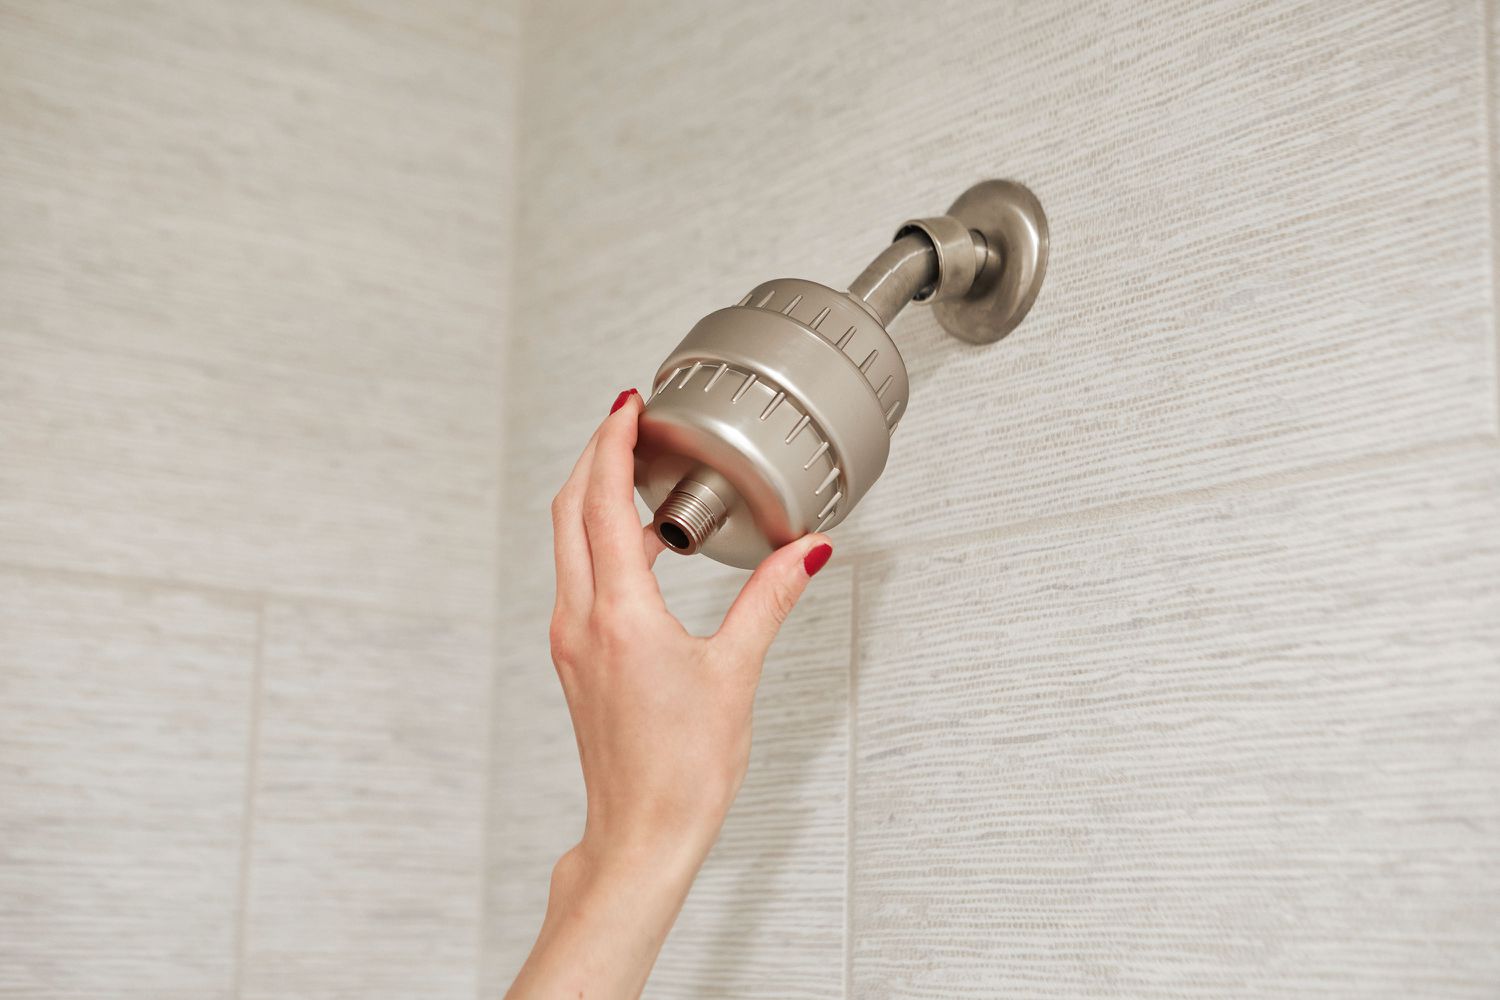 In-line shower filter added to shower arm